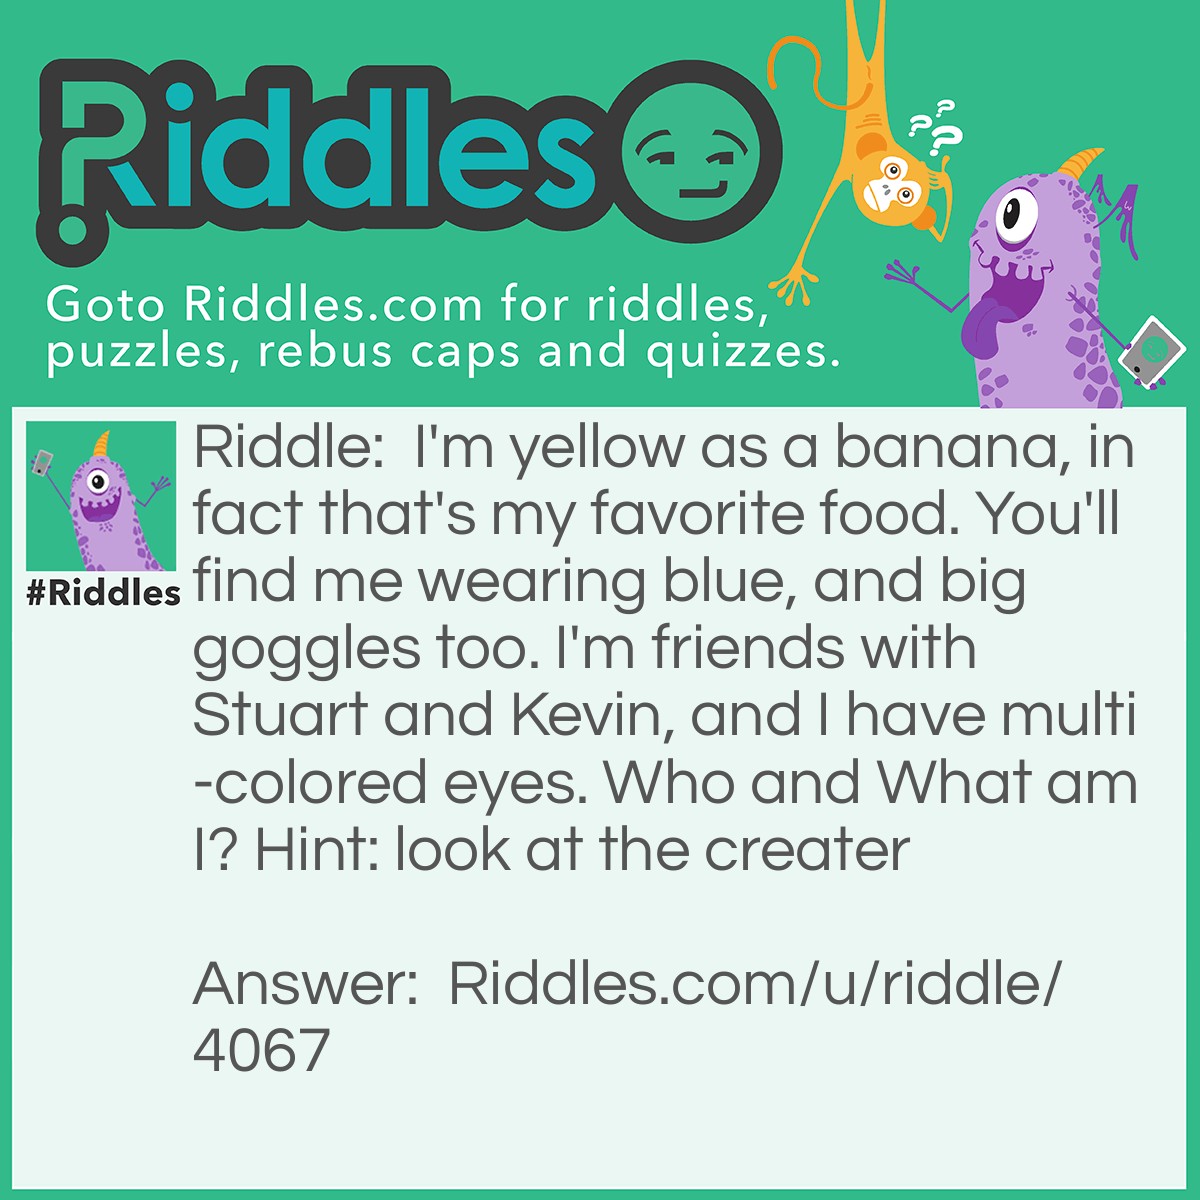 Riddle: I'm yellow as a banana, in fact that's my favorite food. You'll find me wearing blue, and big goggles too. I'm friends with Stuart and Kevin, and I have multi-colored eyes. Who and What am I? Hint: look at the creater Answer: Bob the minion.